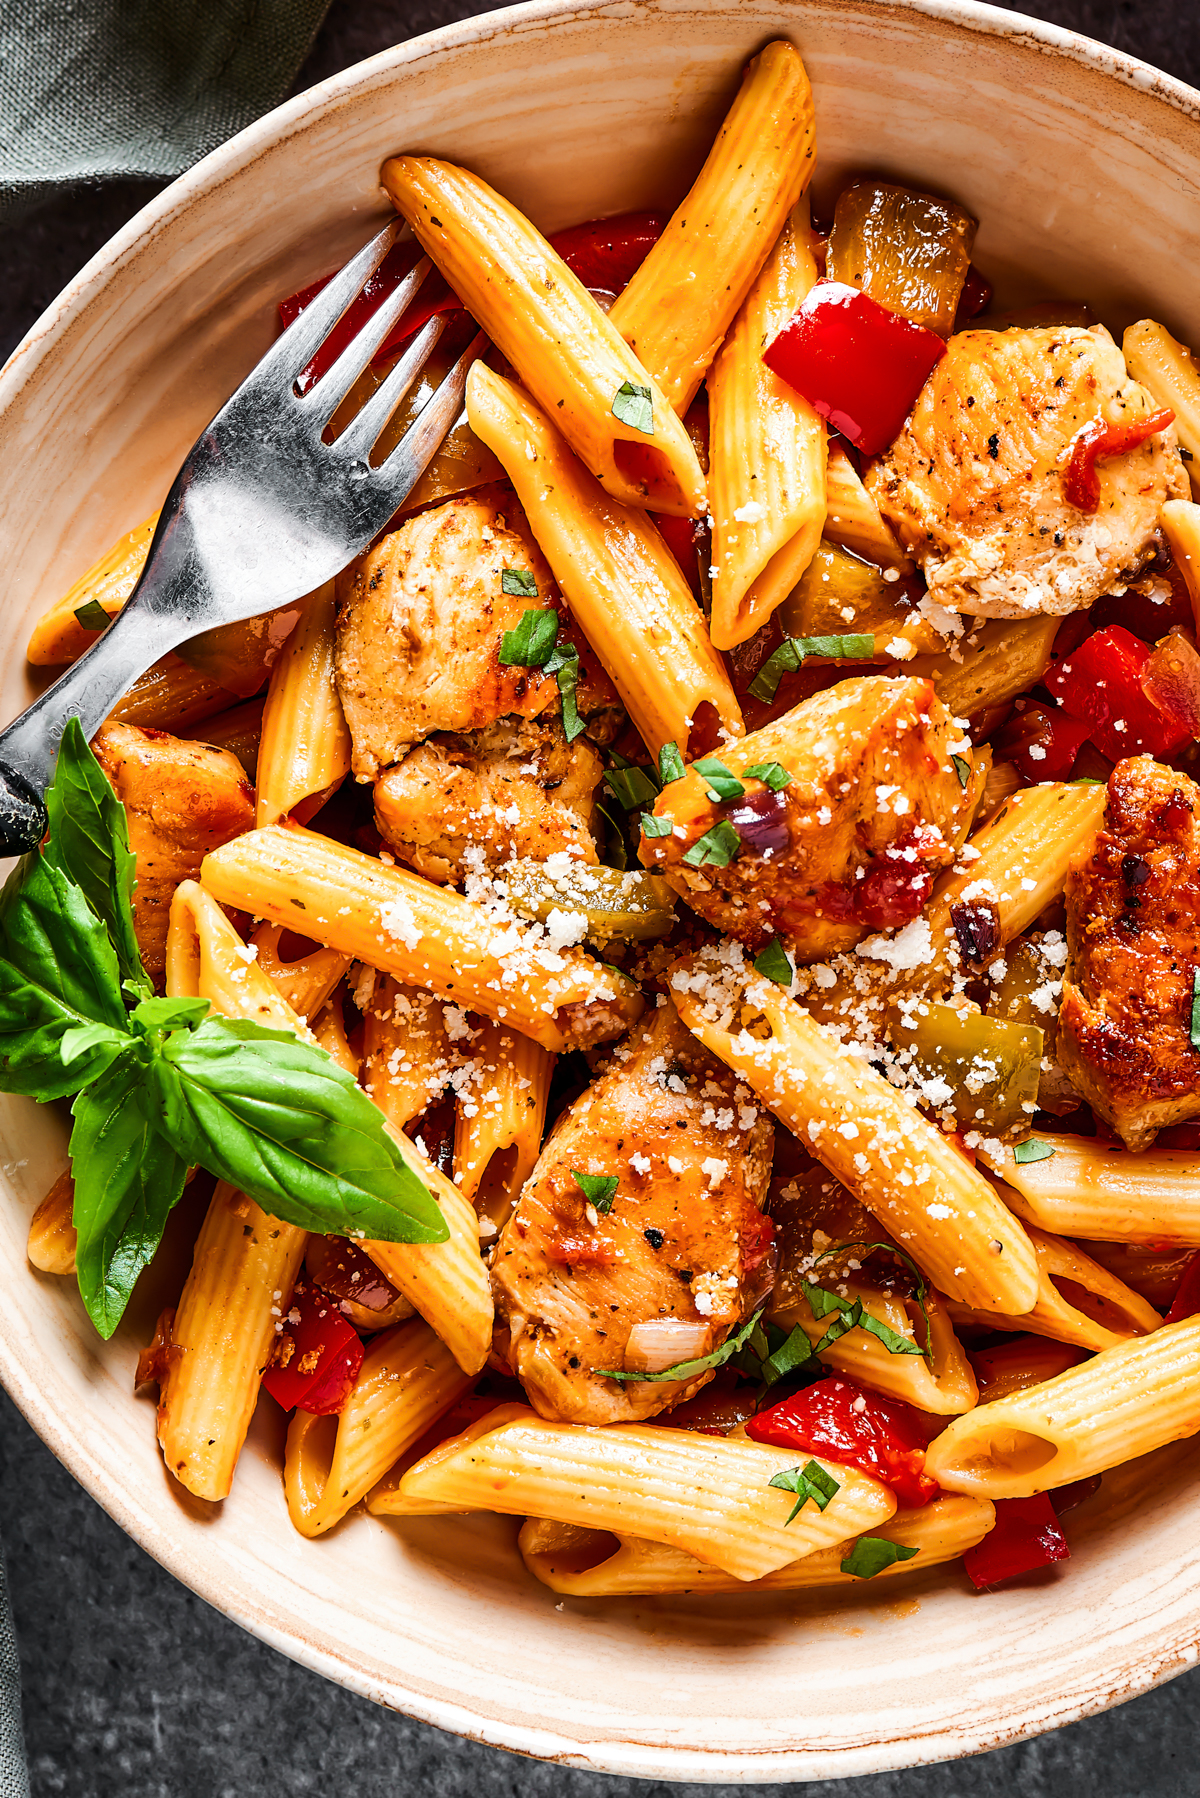 Cooked penne pasta and bite-sized chicken pieces in a bowl.